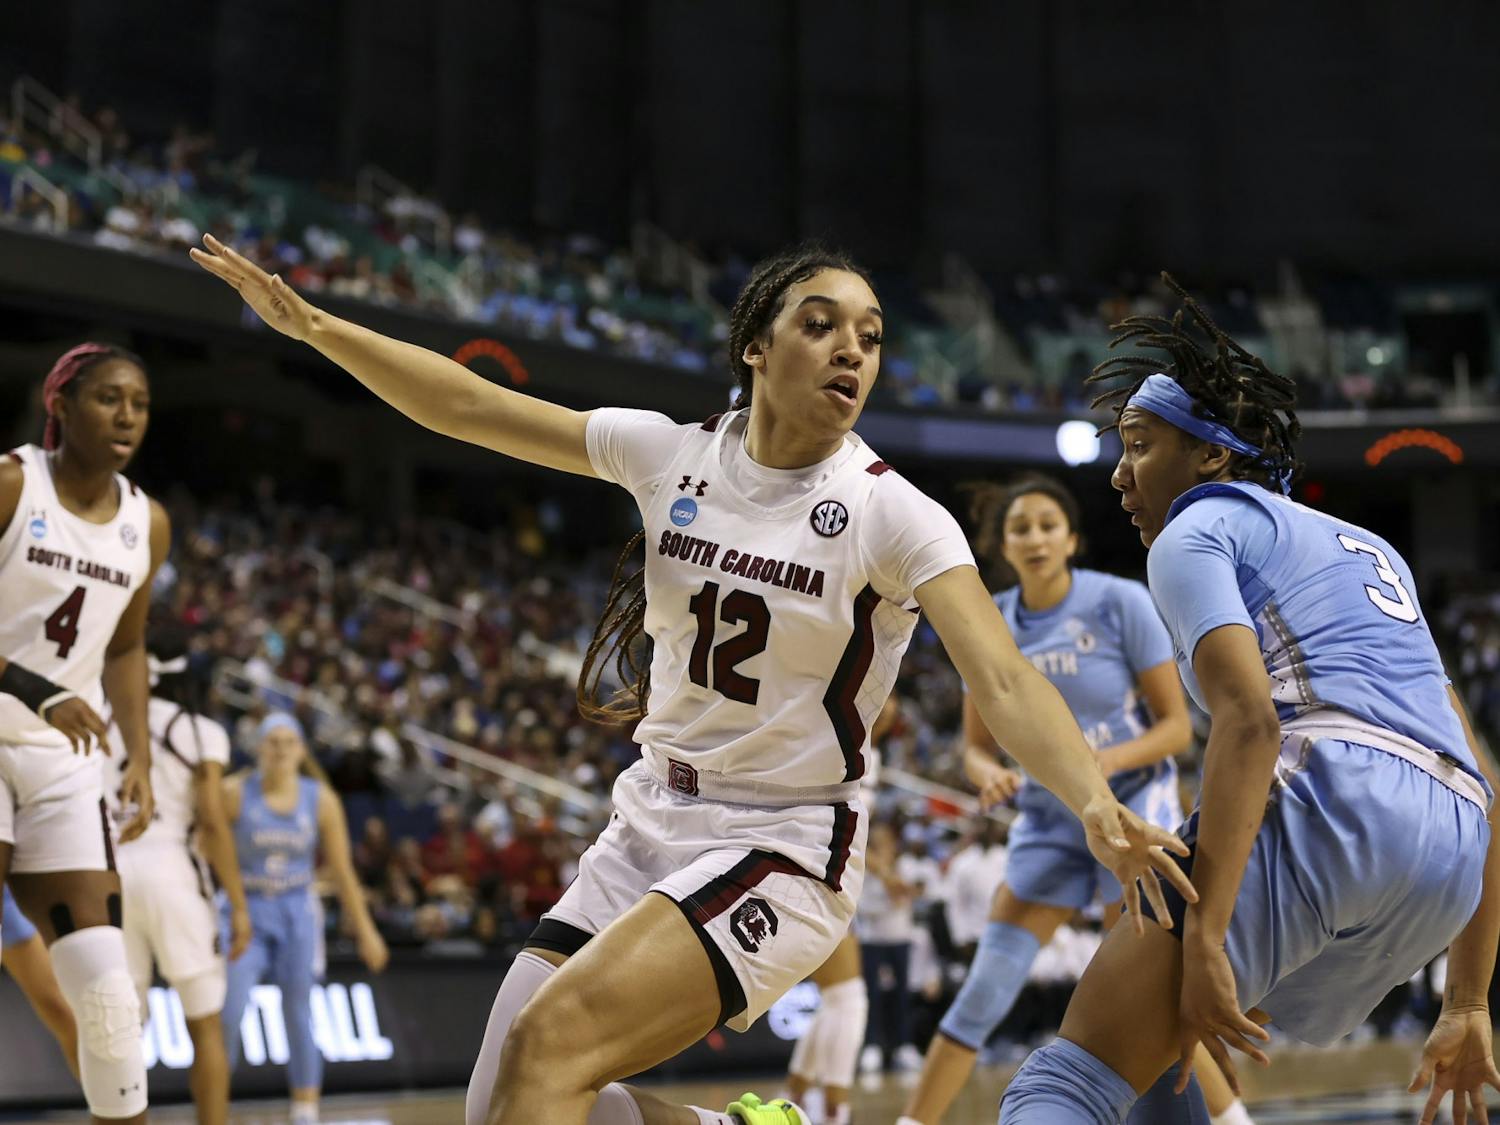 Junior guard Brea Beal on defense during the first quarter of South Carolina's 69-61 victory over North Carolina in the Sweet Sixteen on March 25, 2022.